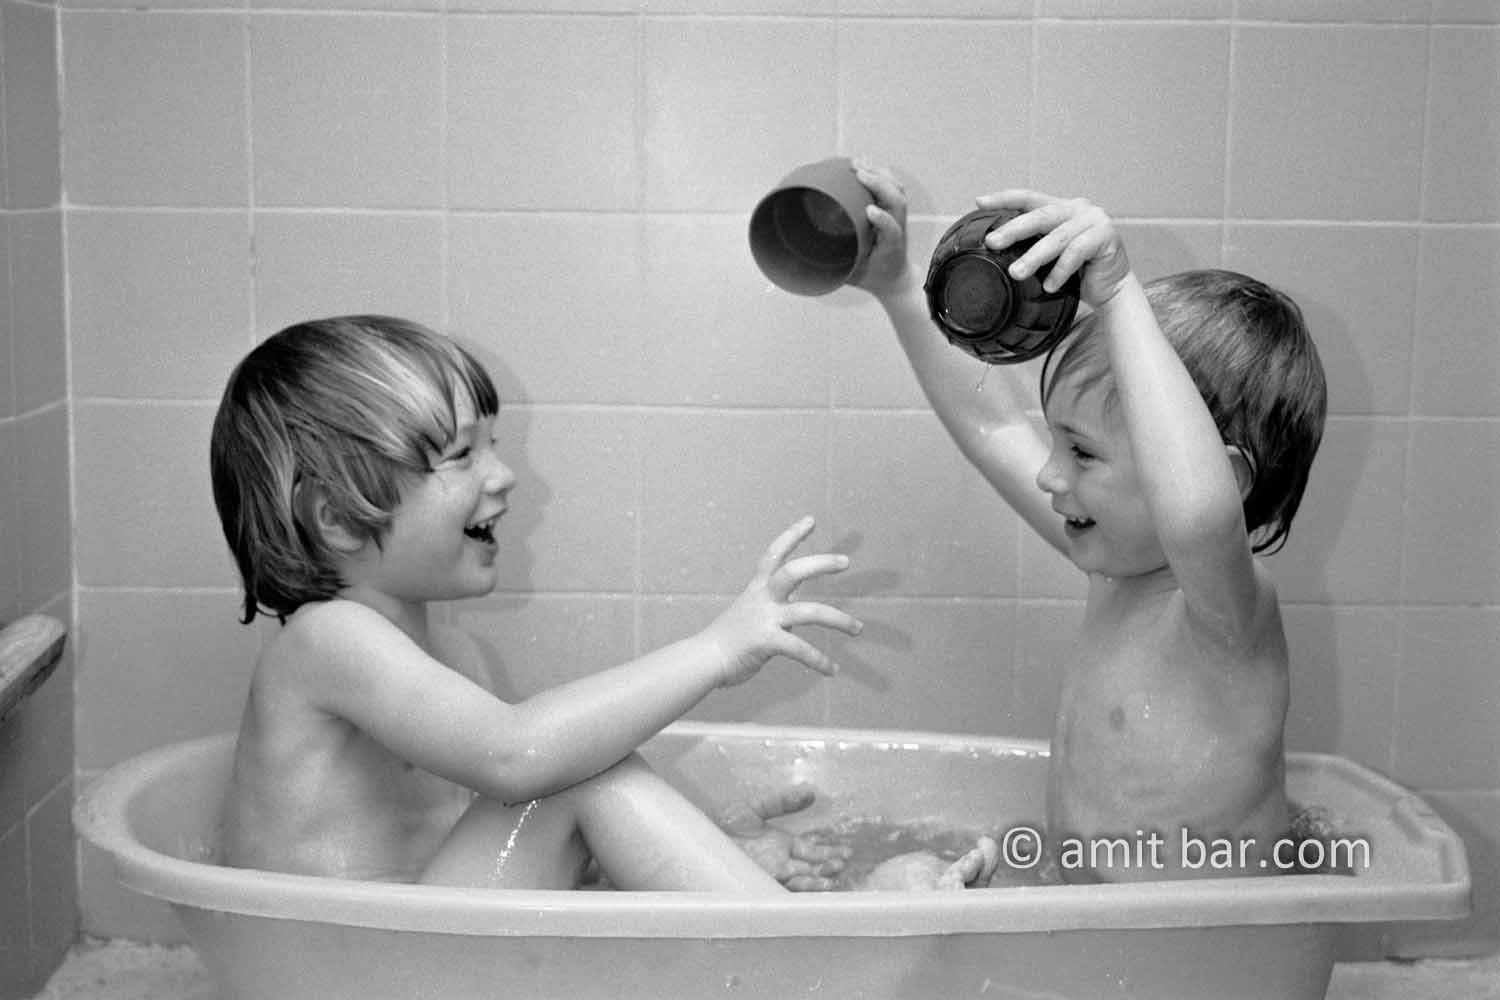 Playing in bath II: Two children are playing in bath